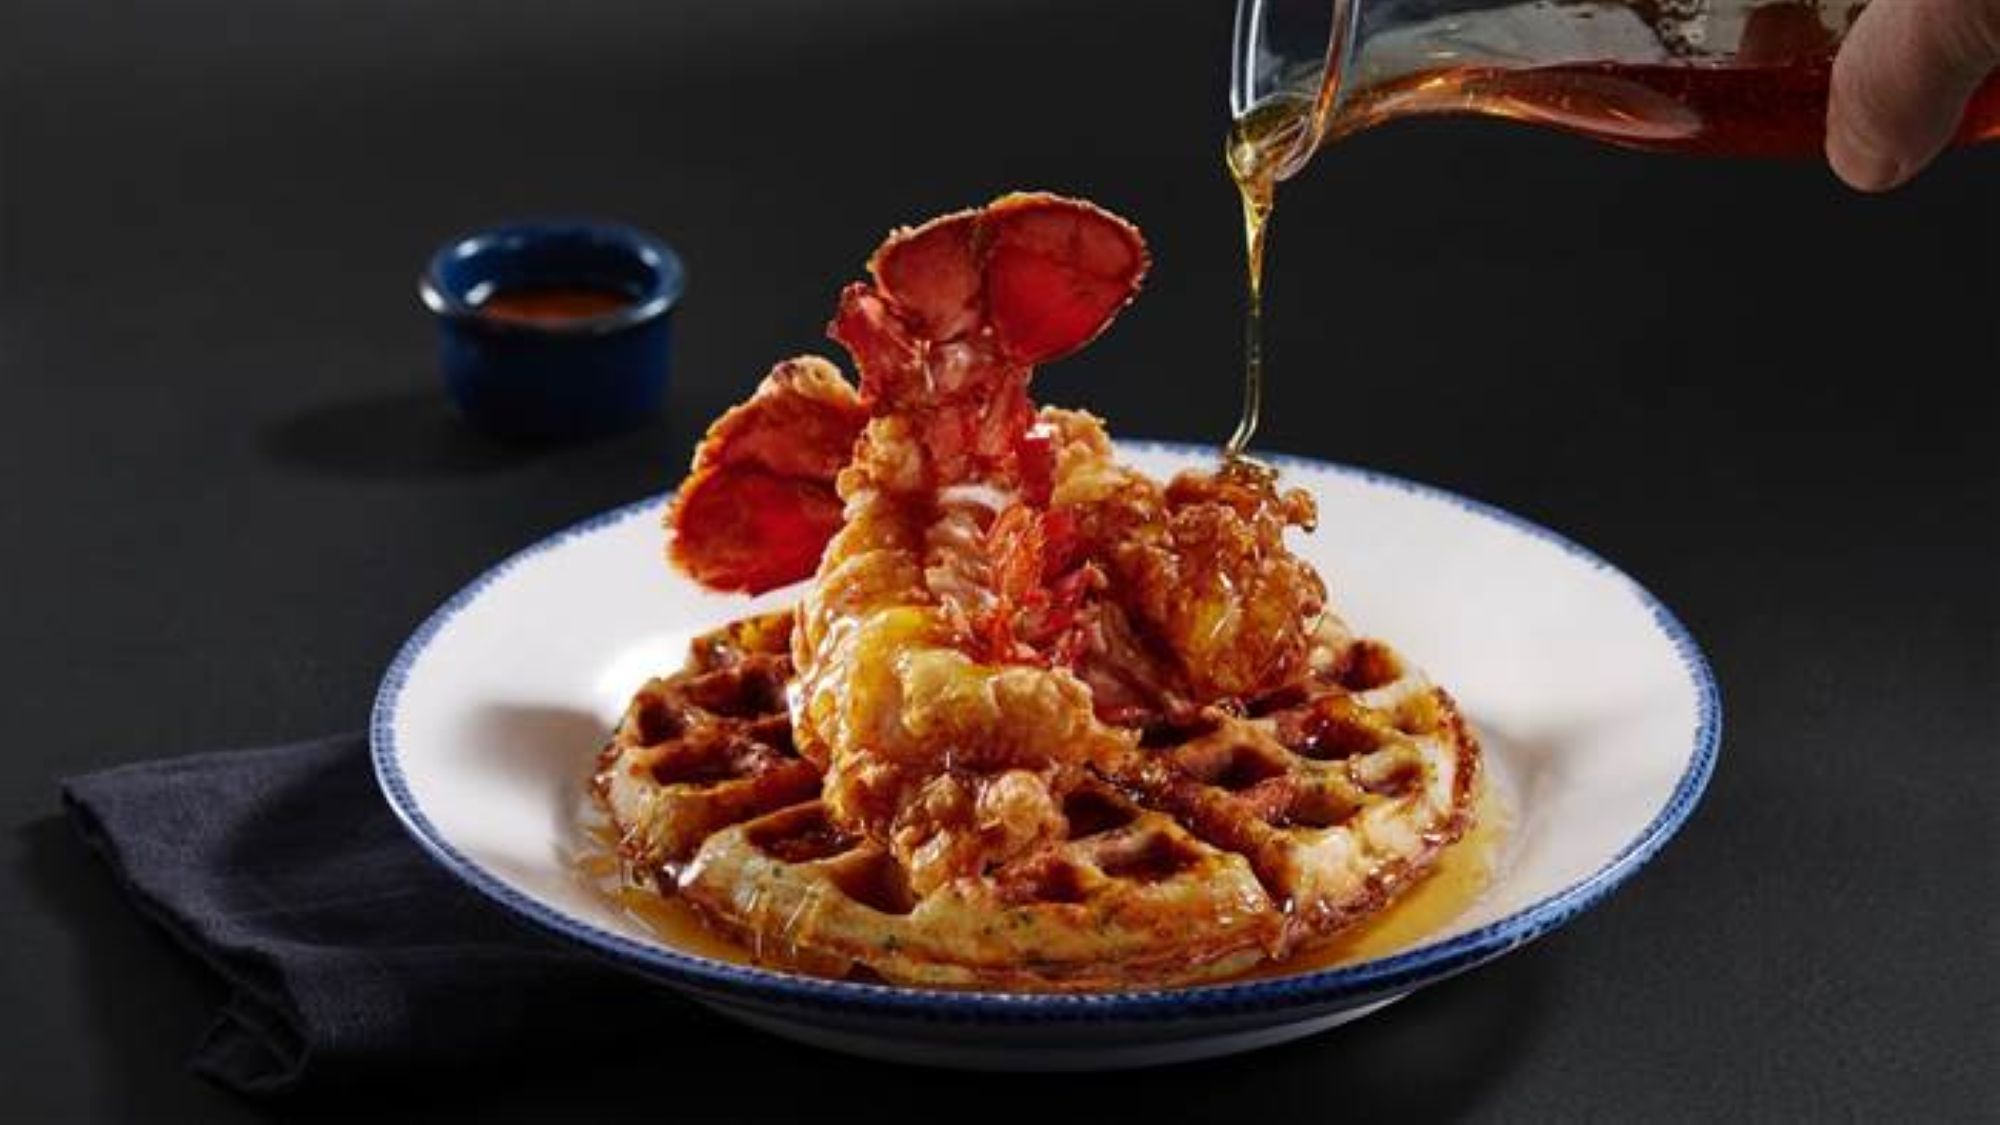 01-Red-Lobster's-lobster-and-waffles_1